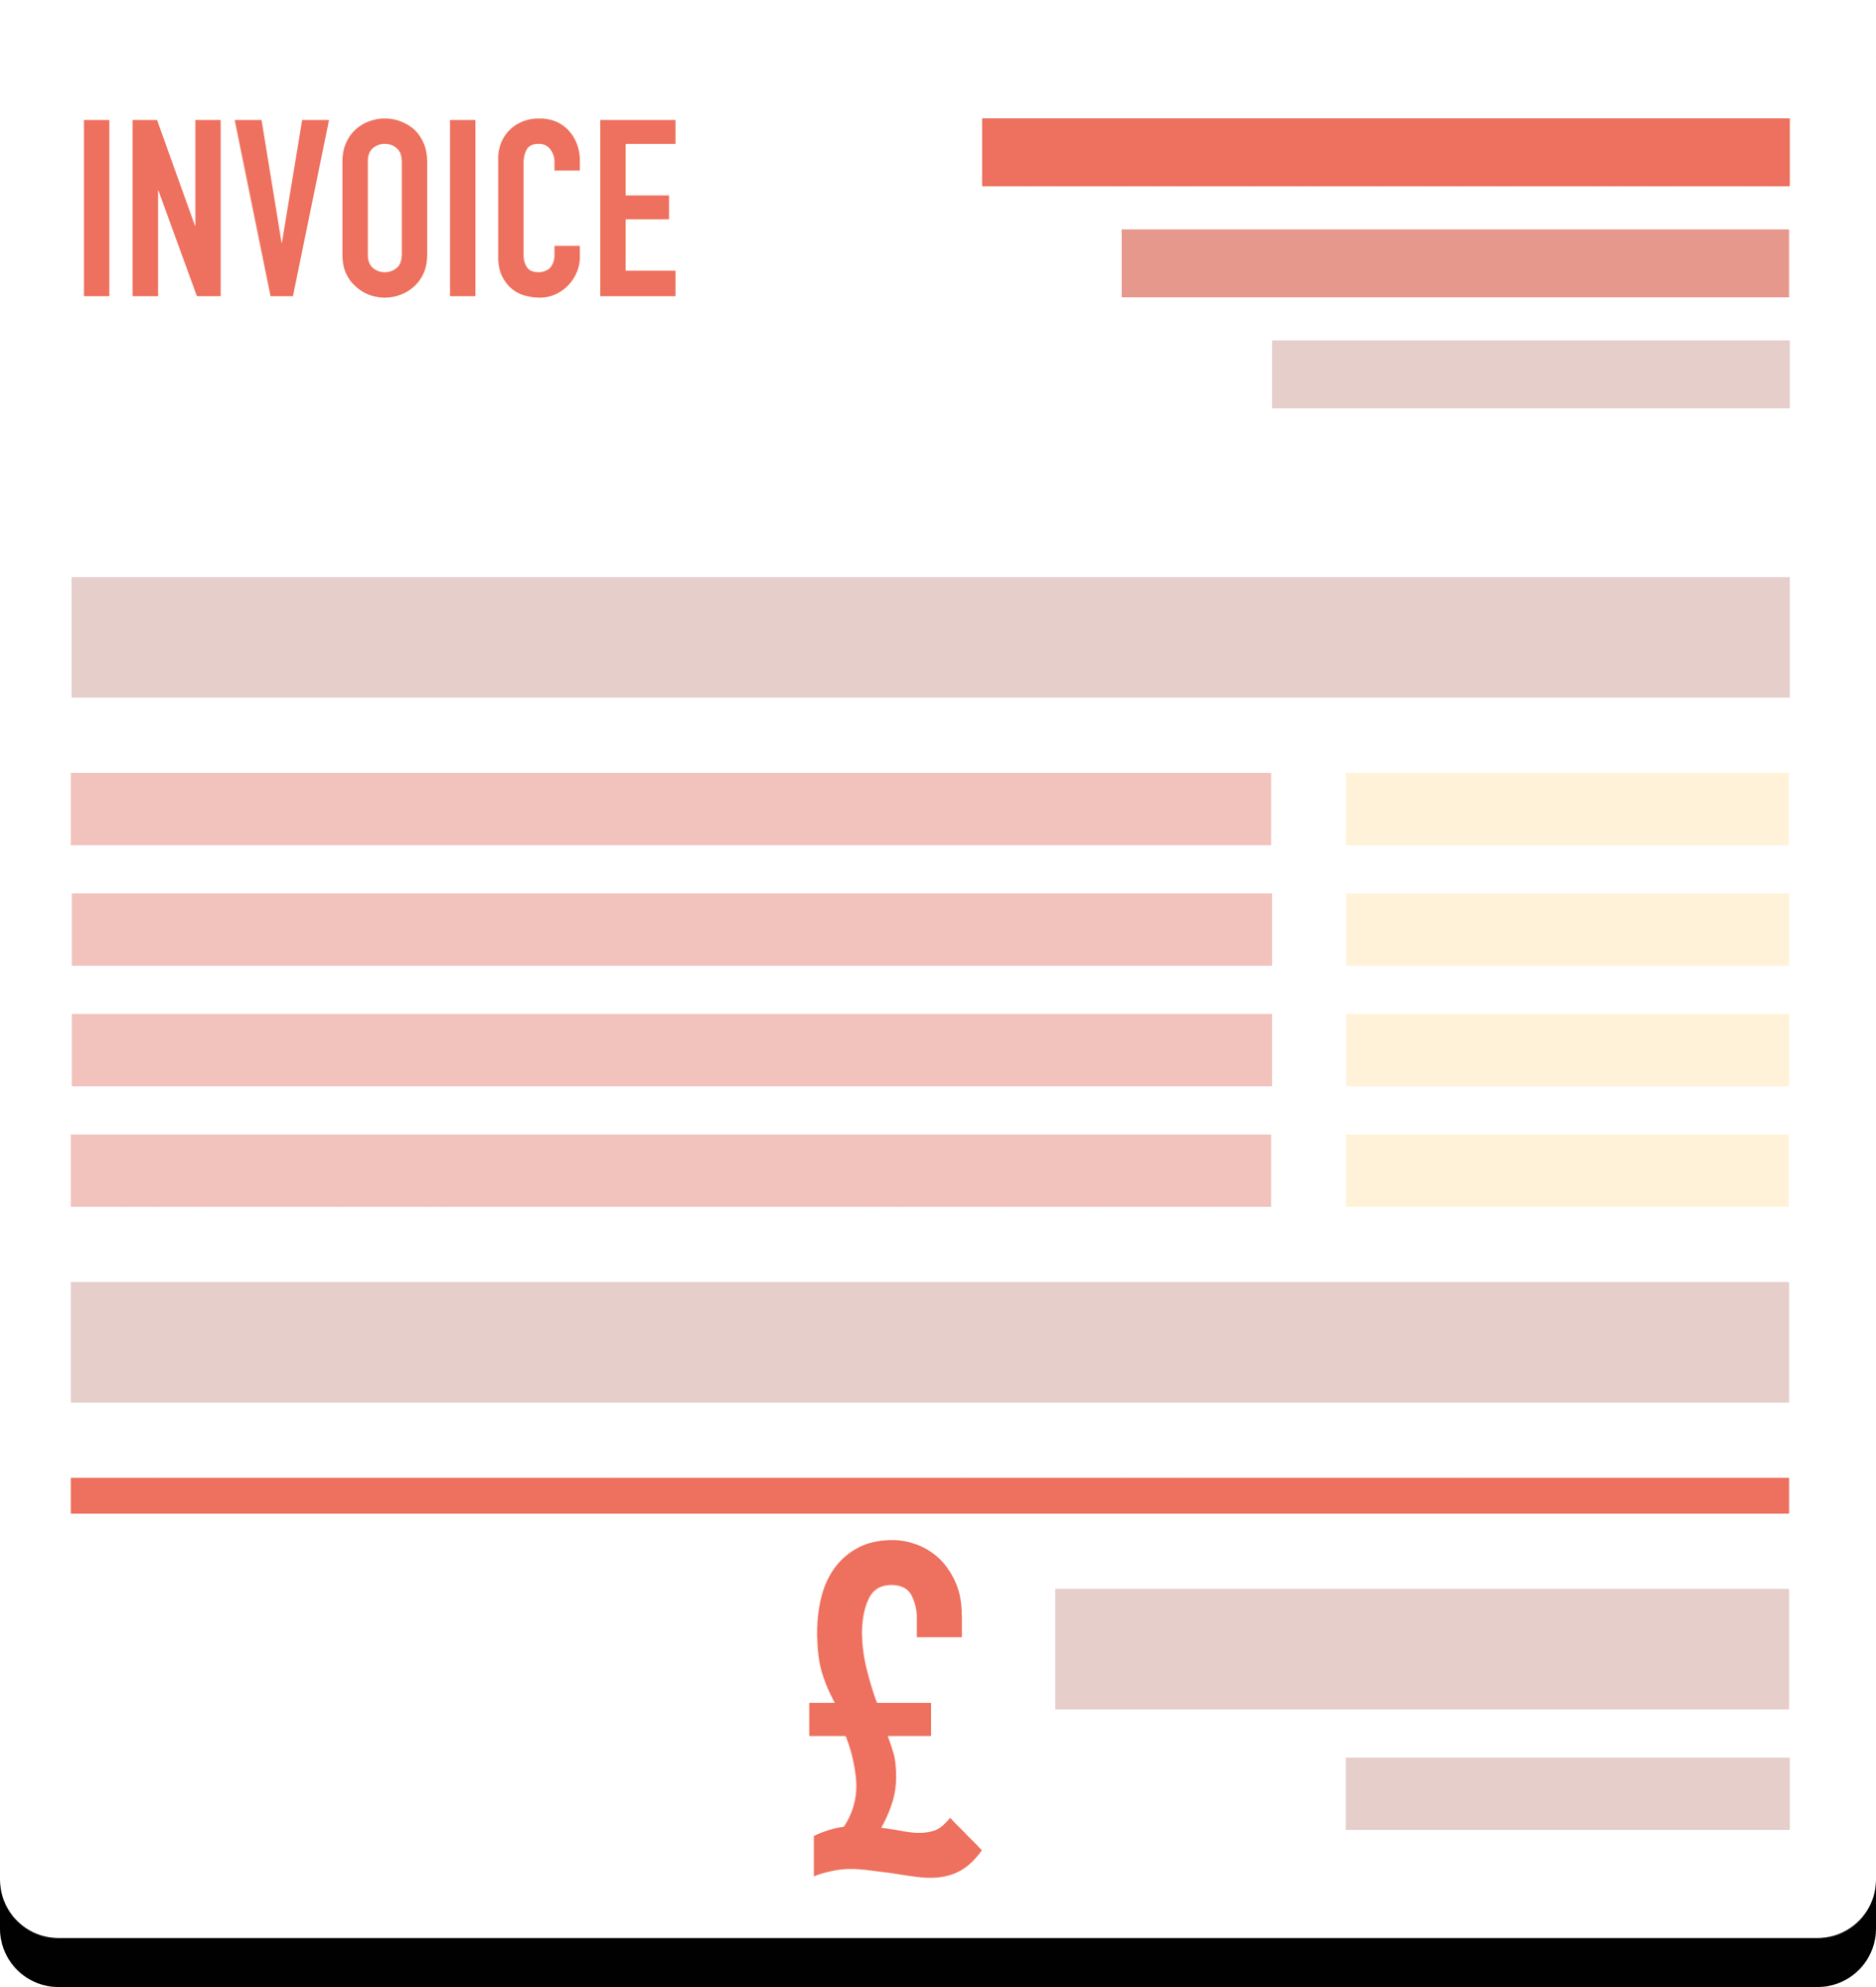 Invoice template for lawn care